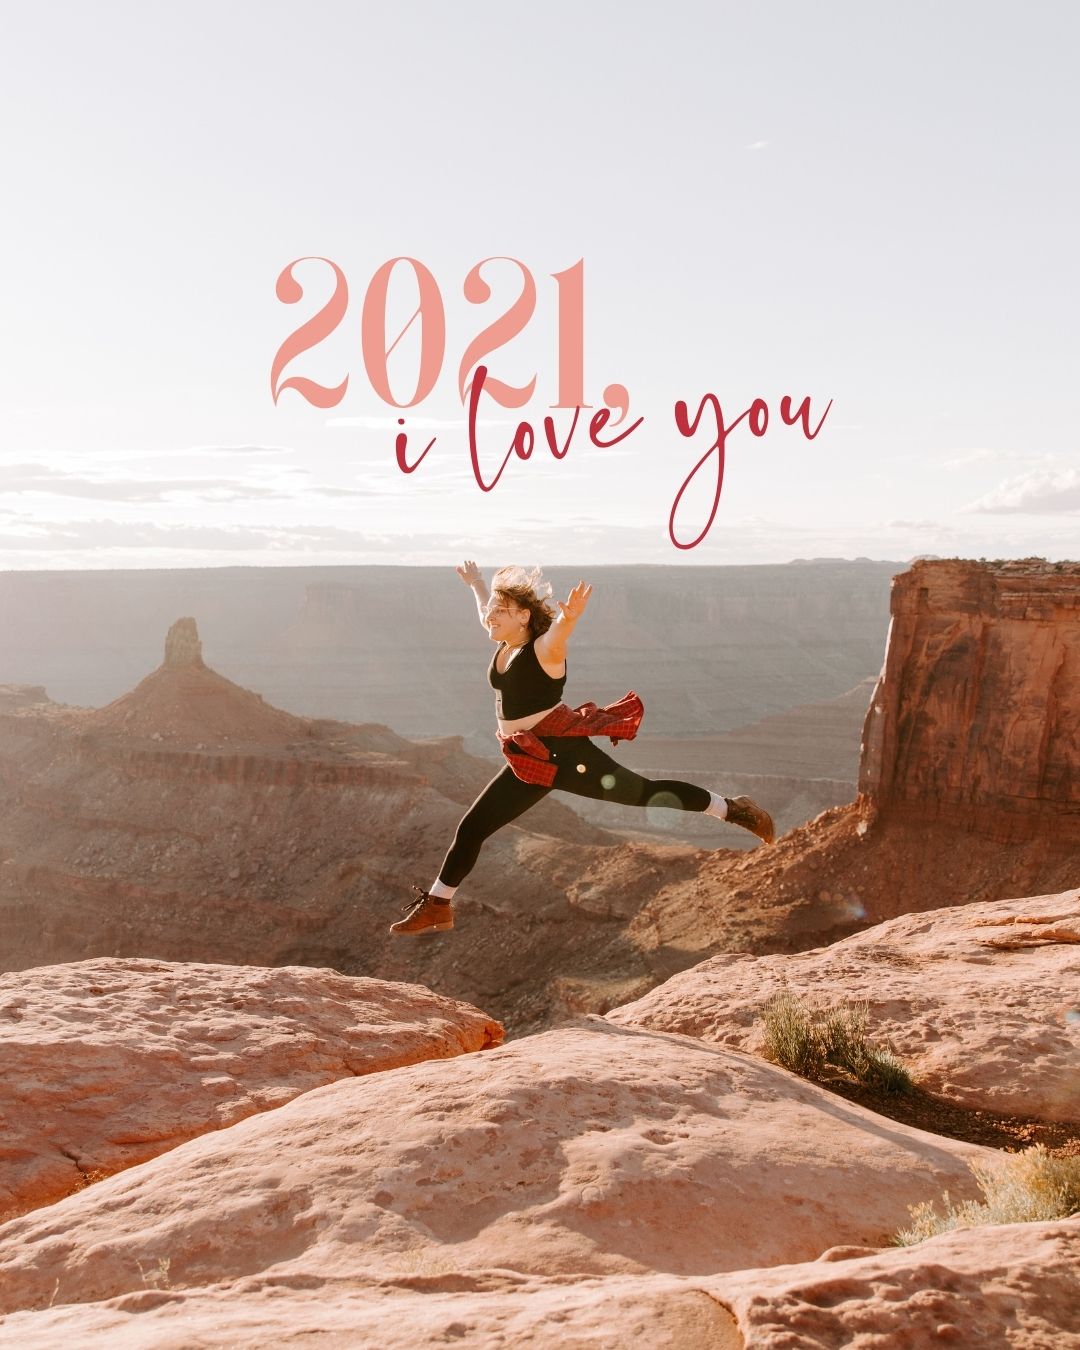 A gleeful woman leaps across a gap in a canyon within Canyonlands National Park, and the words "2021, I Love You" are painted across the sky in pink and red type.